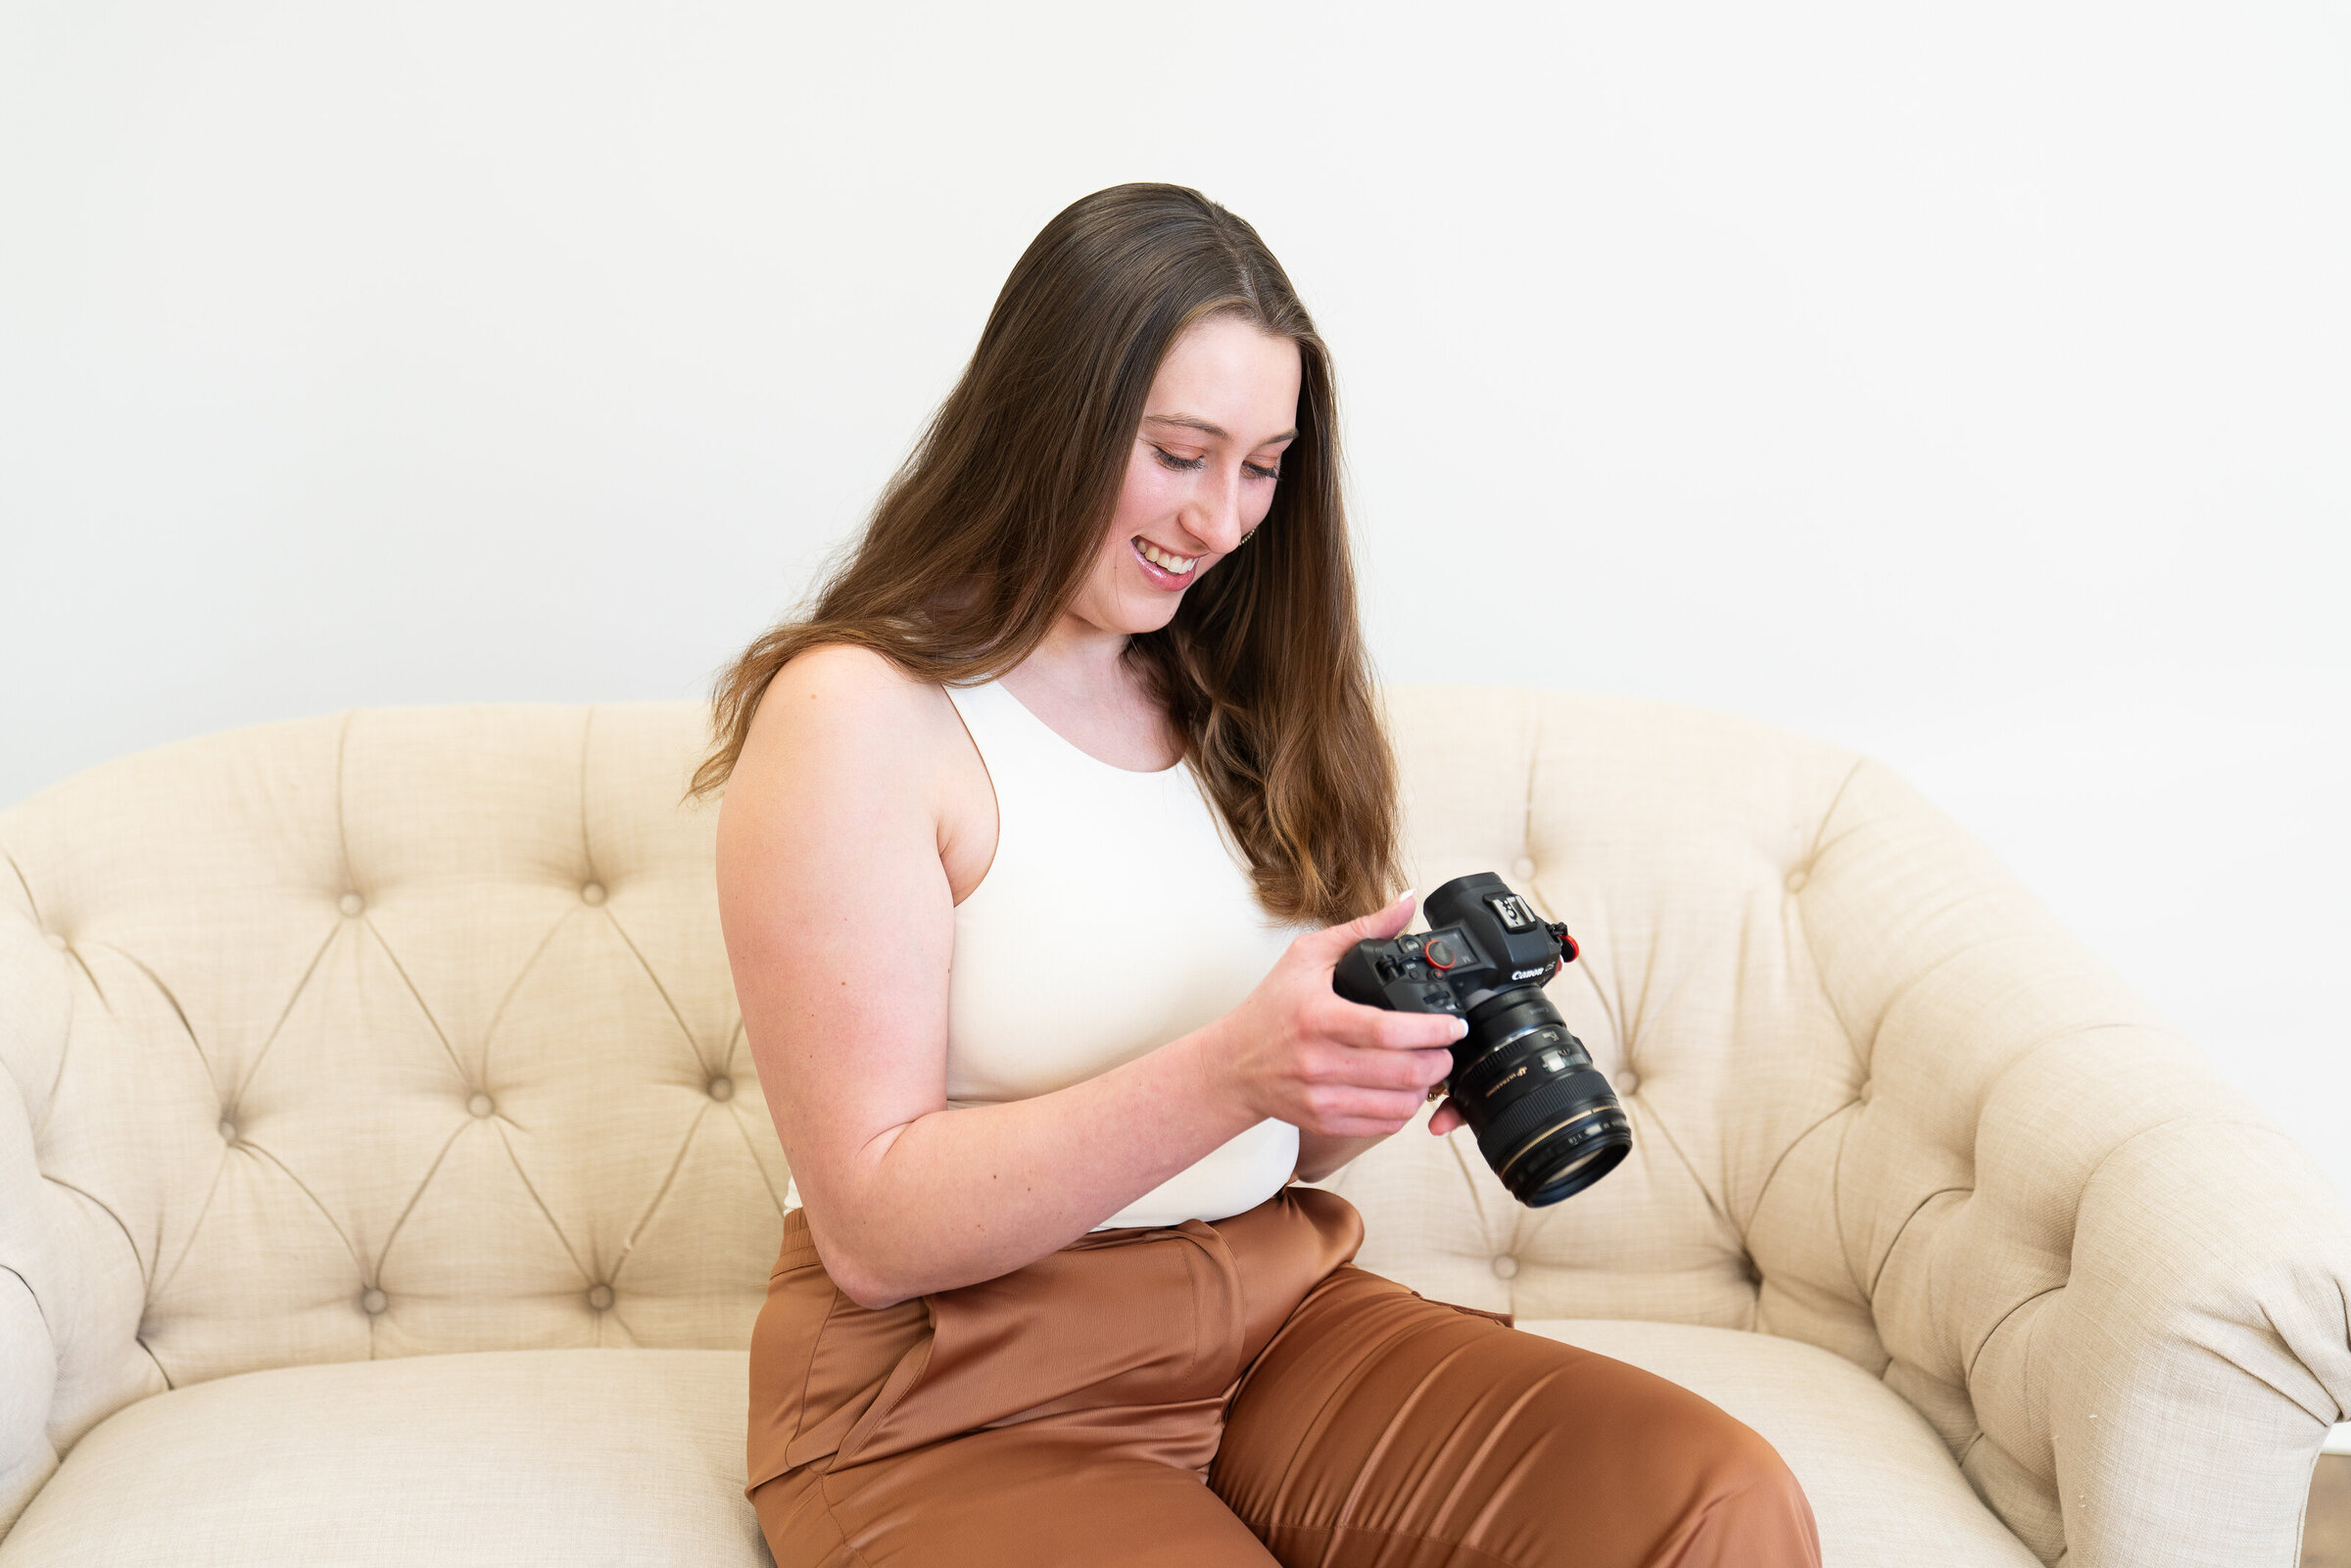 Woman looks at her camera and smiles